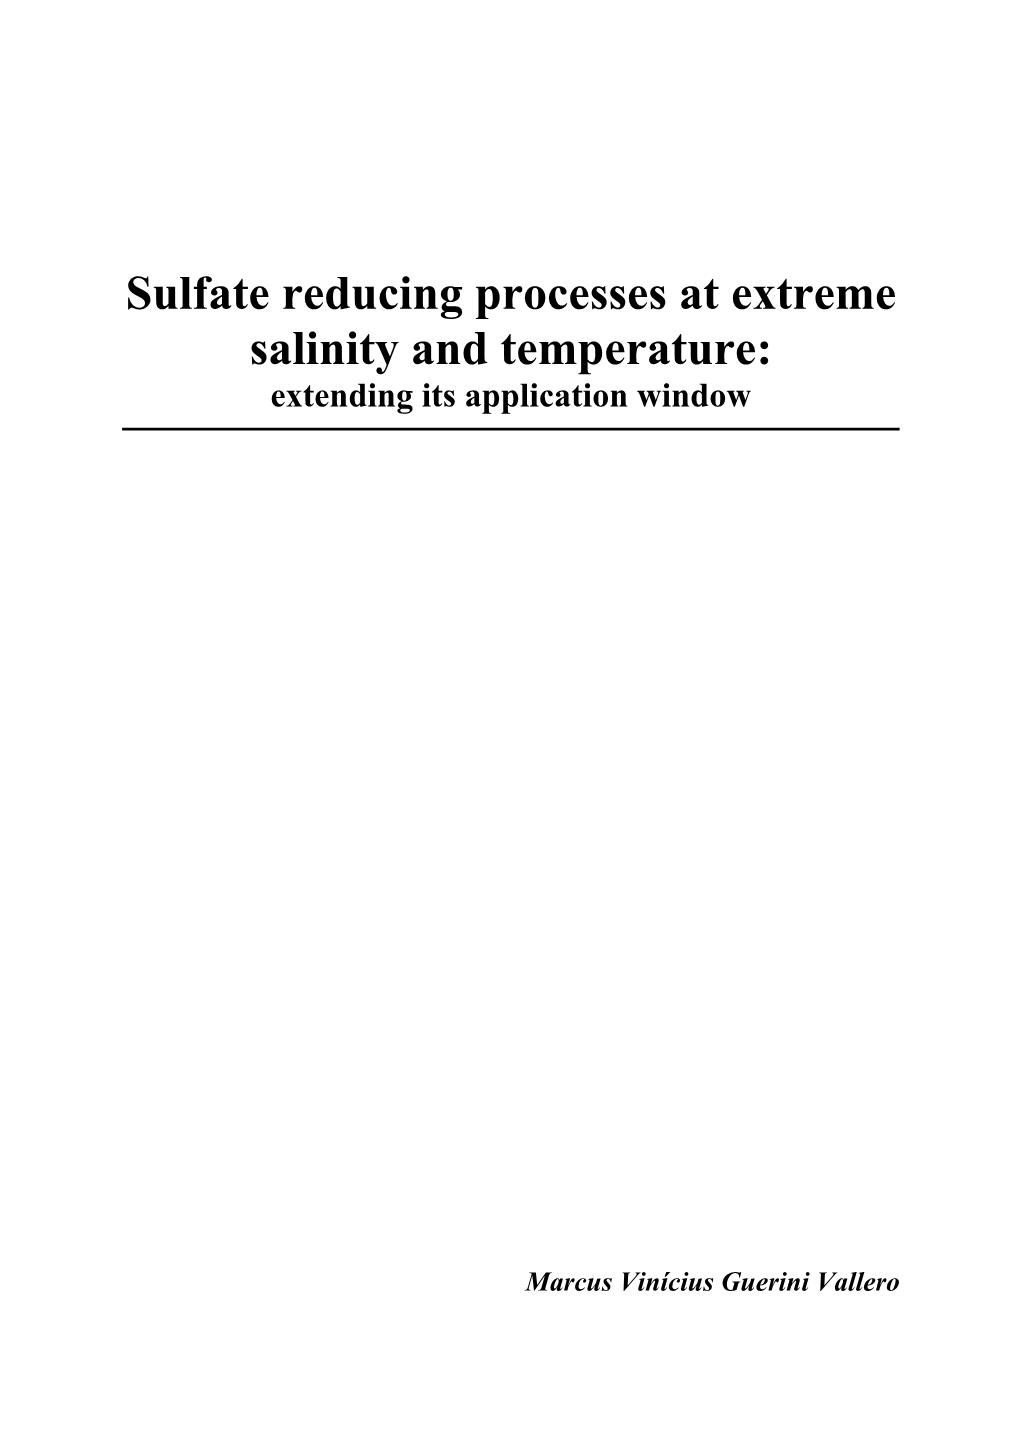 Sulfate Reducing Processes at Extreme Salinity and Temperature: Extending Its Application Window